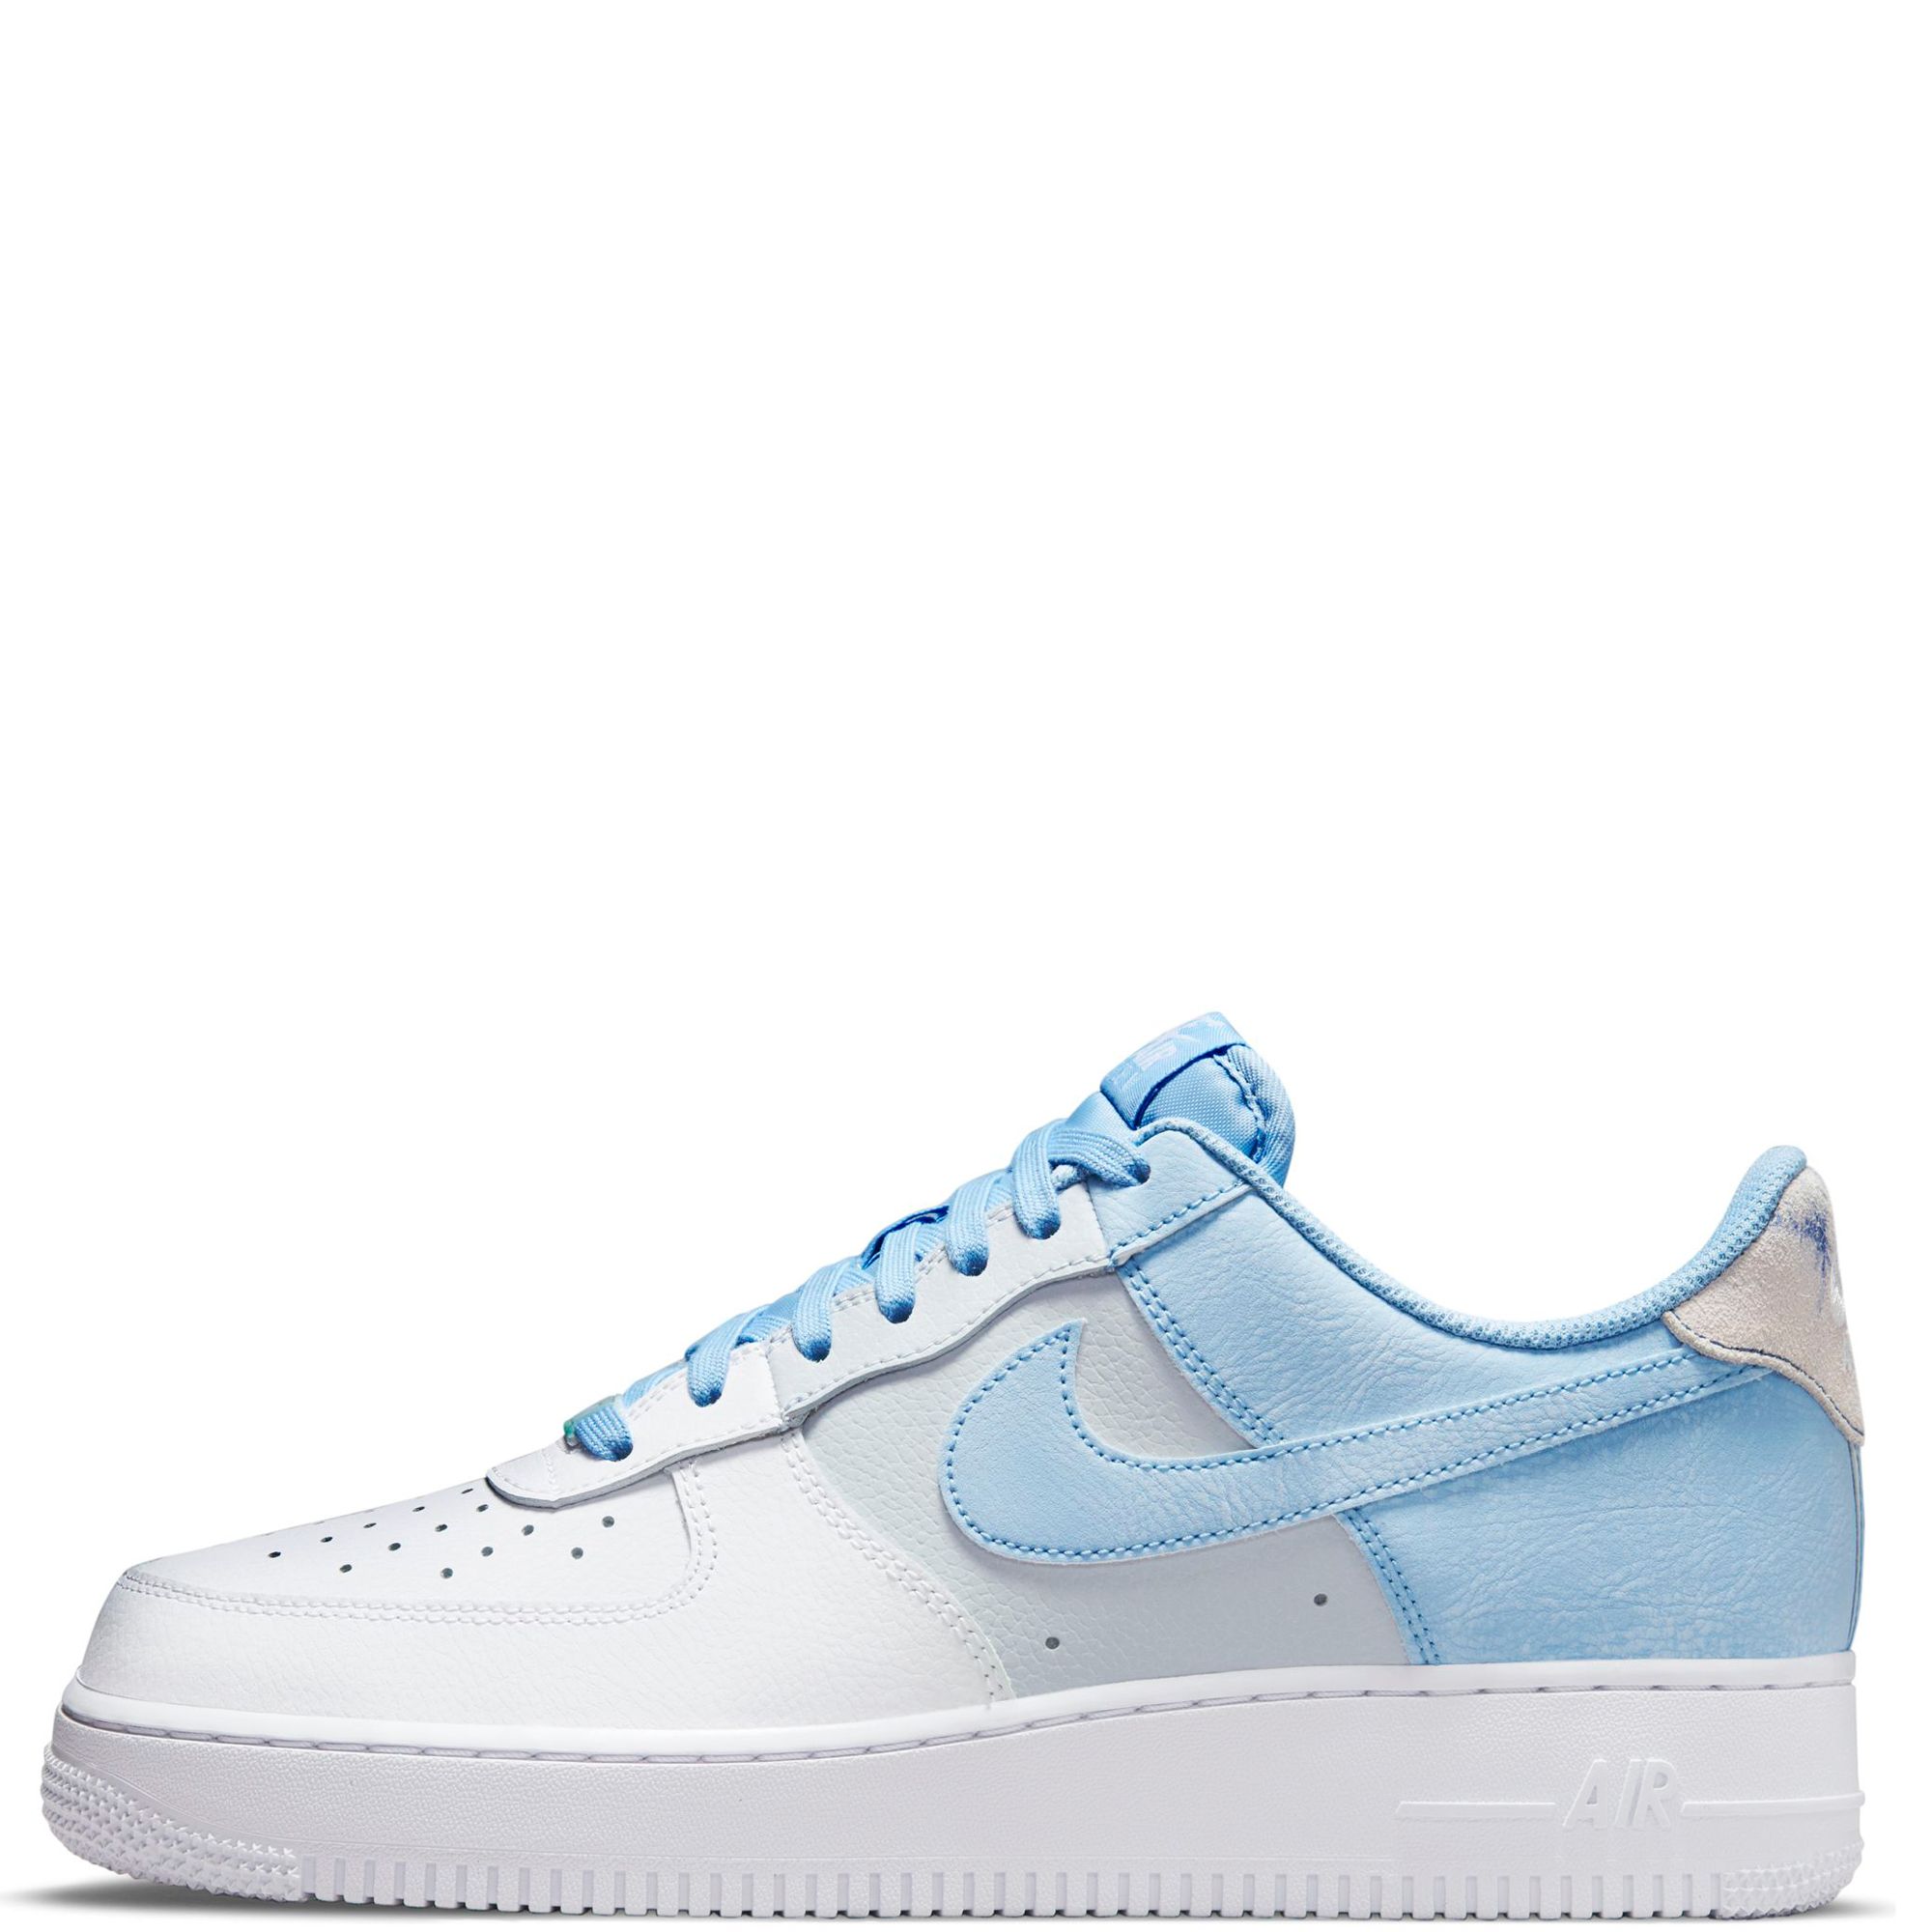 Nike Air Force 1 07 LV8 'Psychic Blue' Shoes - Size 12